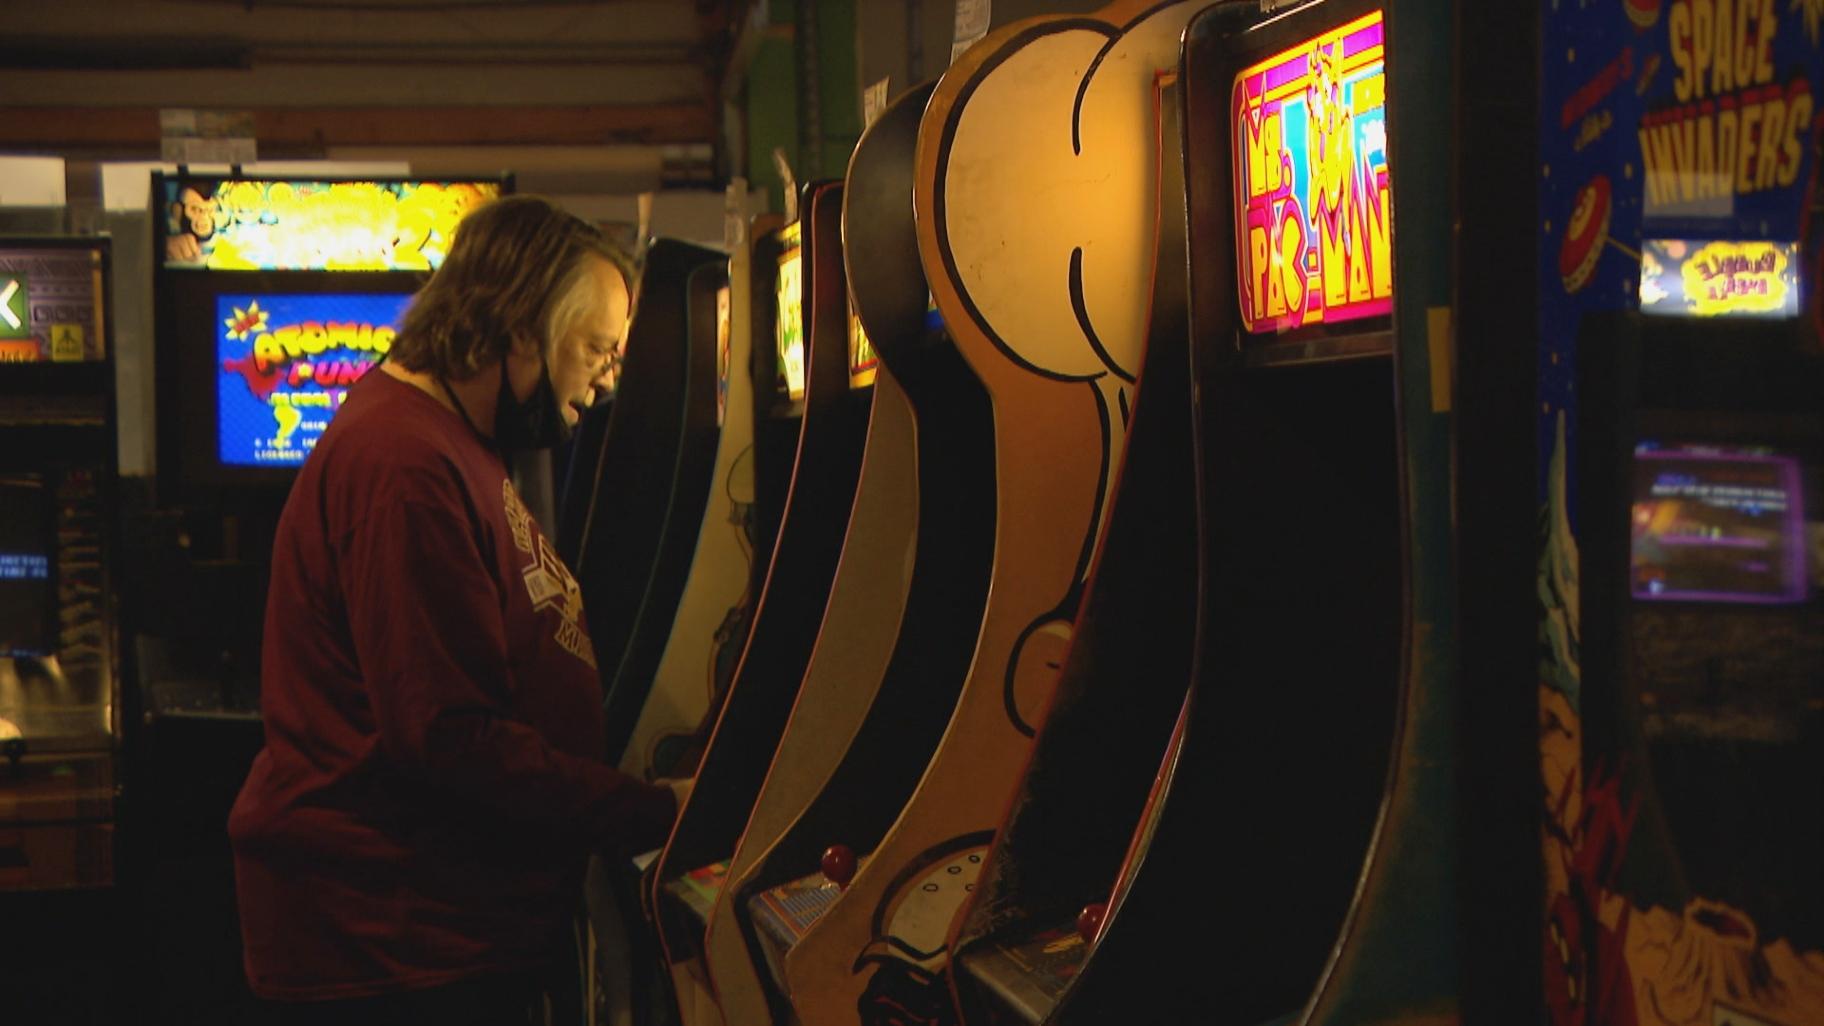 At last count, the arcade had more than 950 games on the floor. That number goes up by one each week when a new addition is unveiled at the Monday Mystery Game event. (WTTW News)